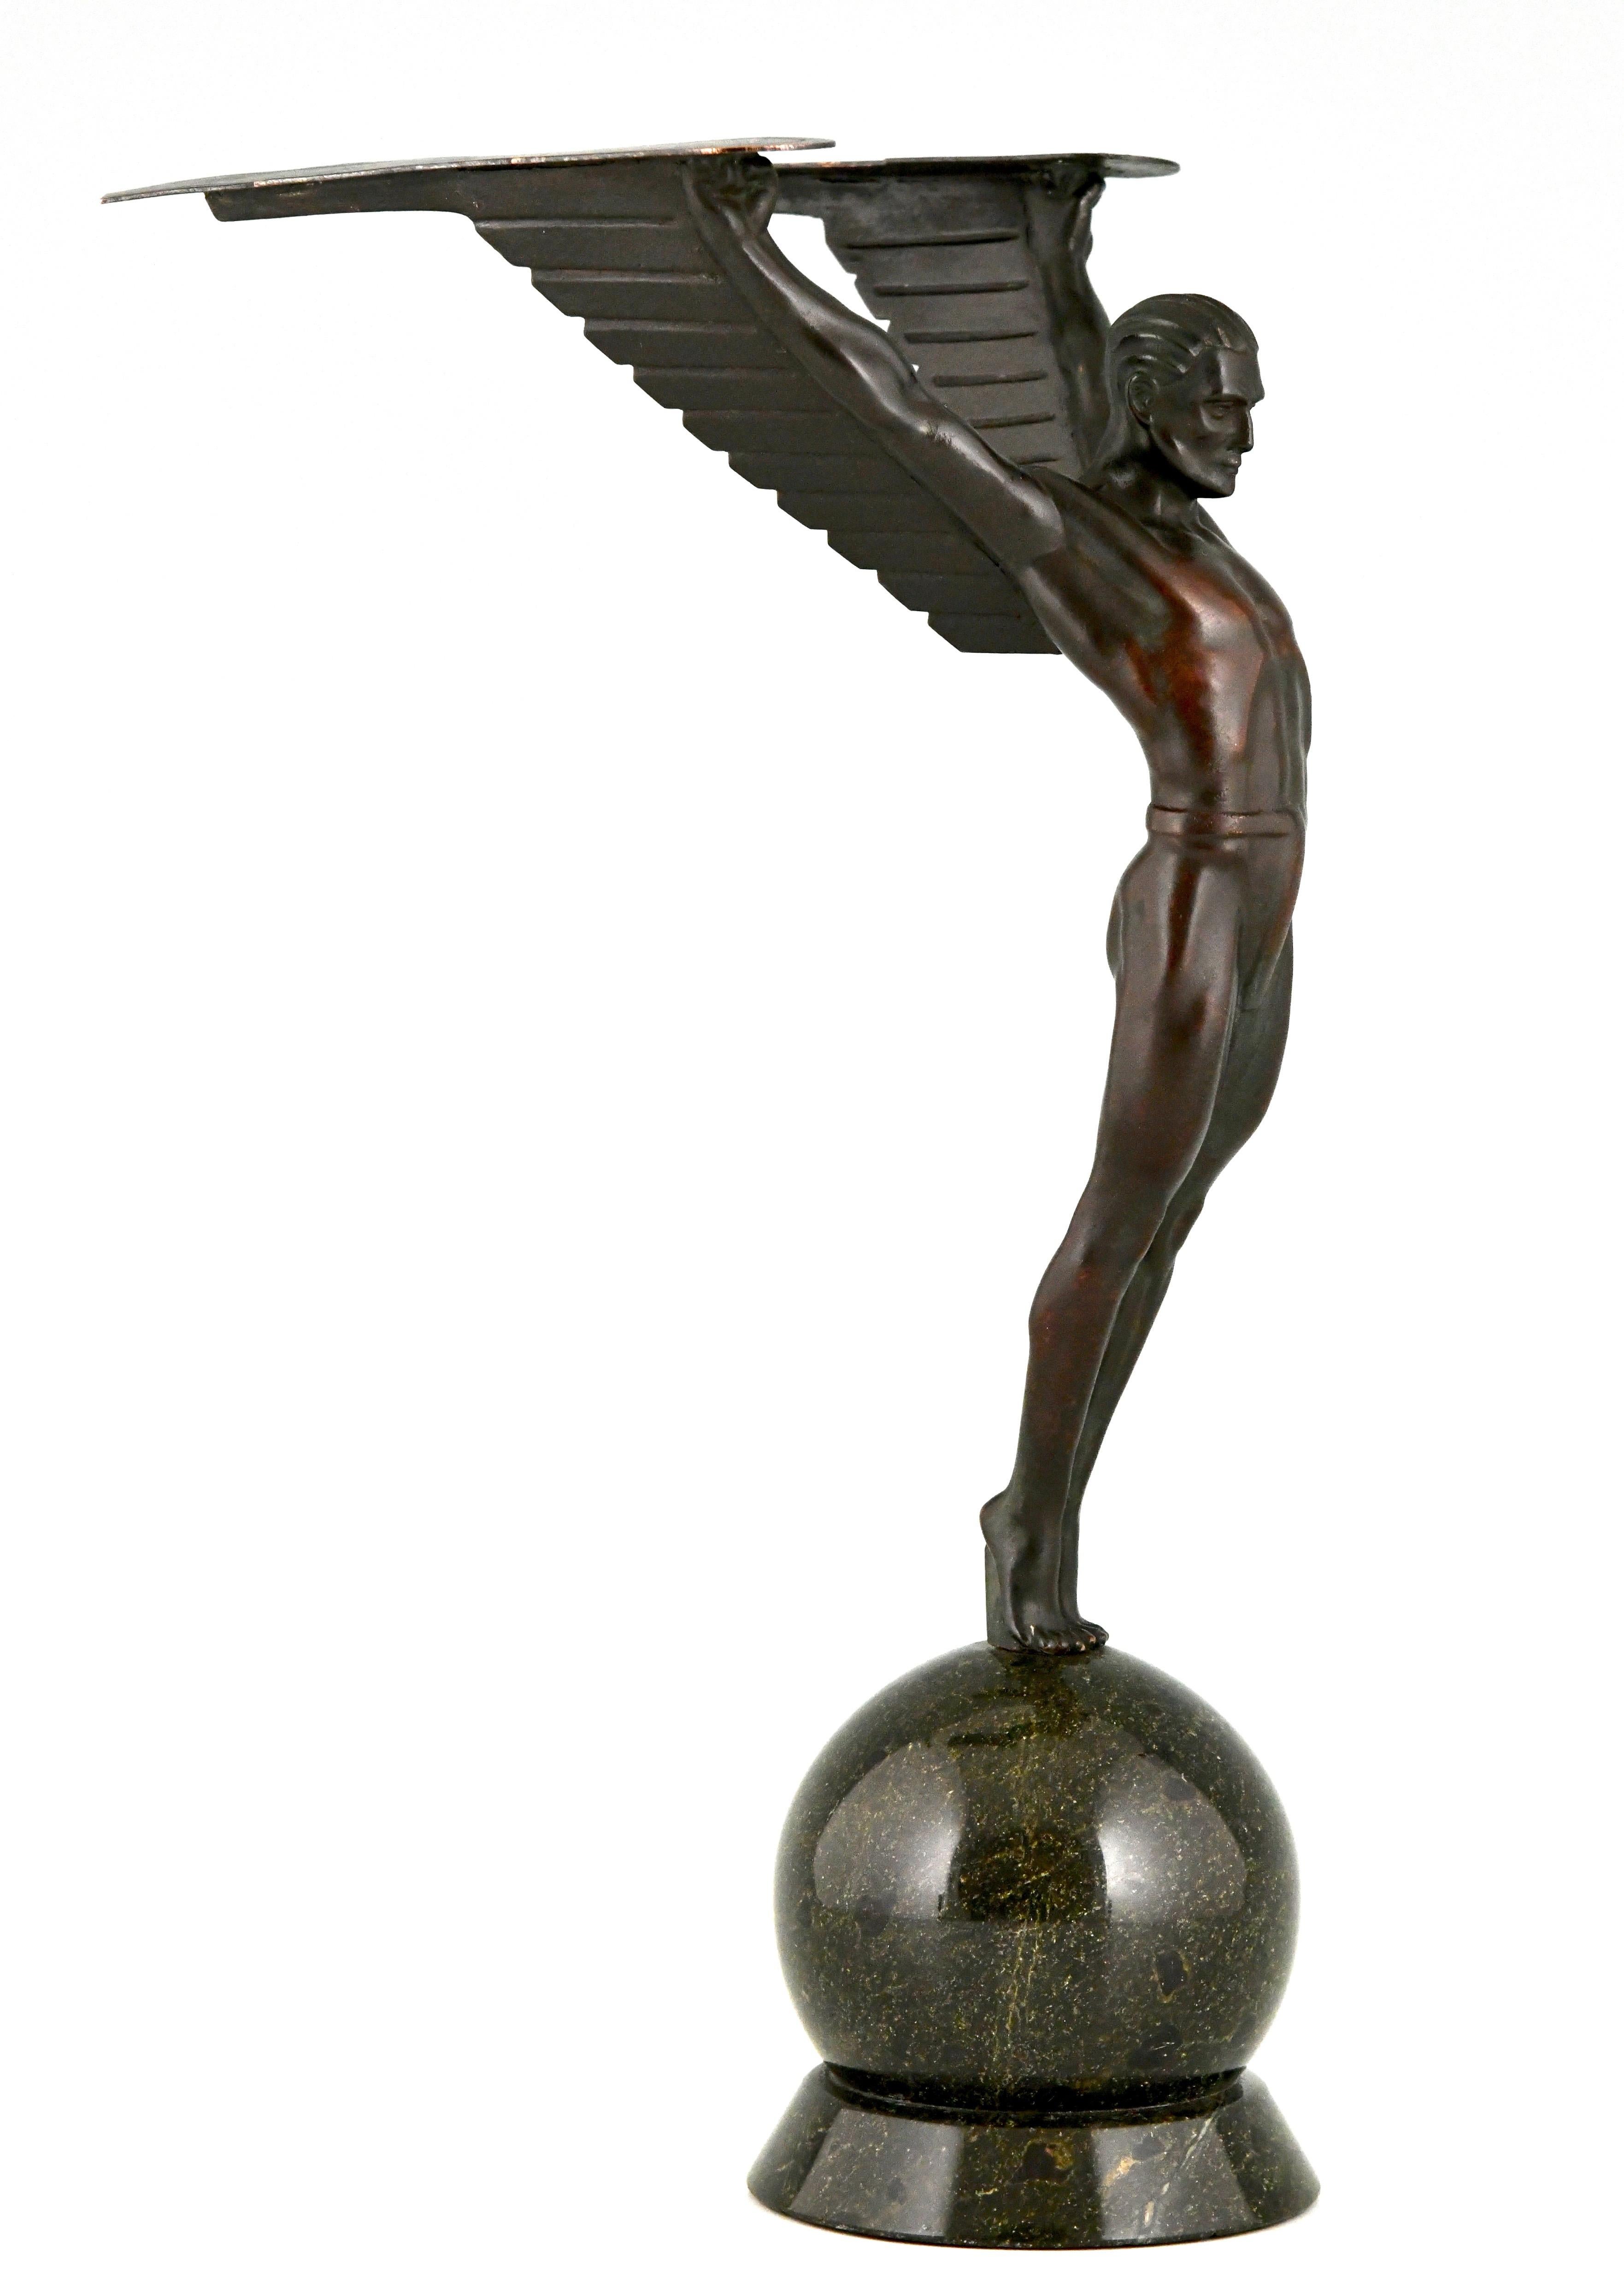 Mid-20th Century Icarus Art Deco Sculpture of a Winged Athlete in the Style of Schmidt Hofer